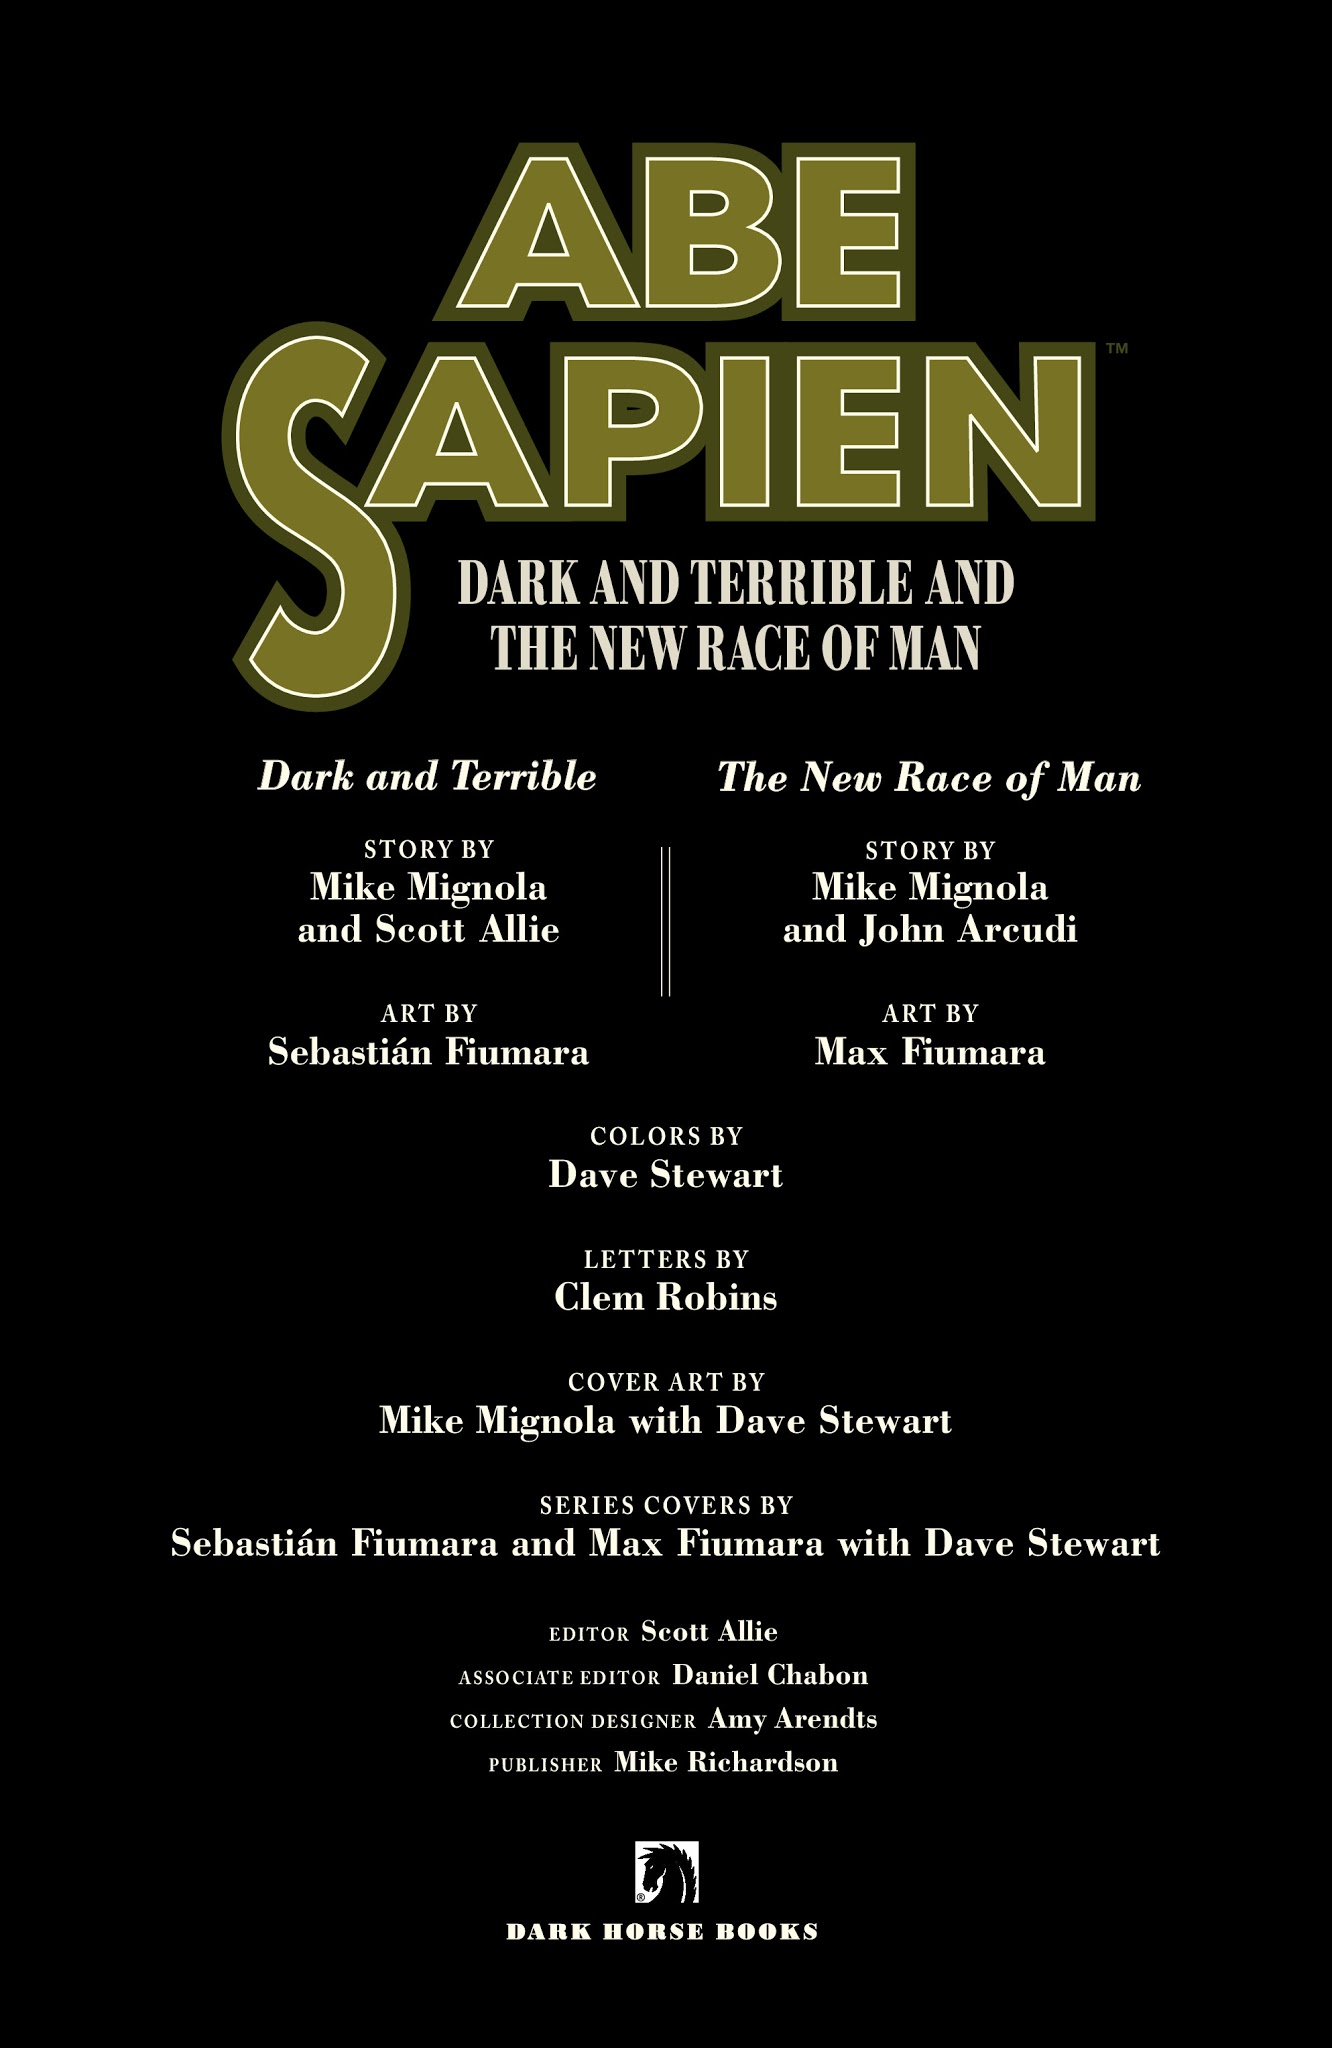 Read online Abe Sapien: Dark and Terrible and The New Race of Man comic -  Issue # TPB - 5